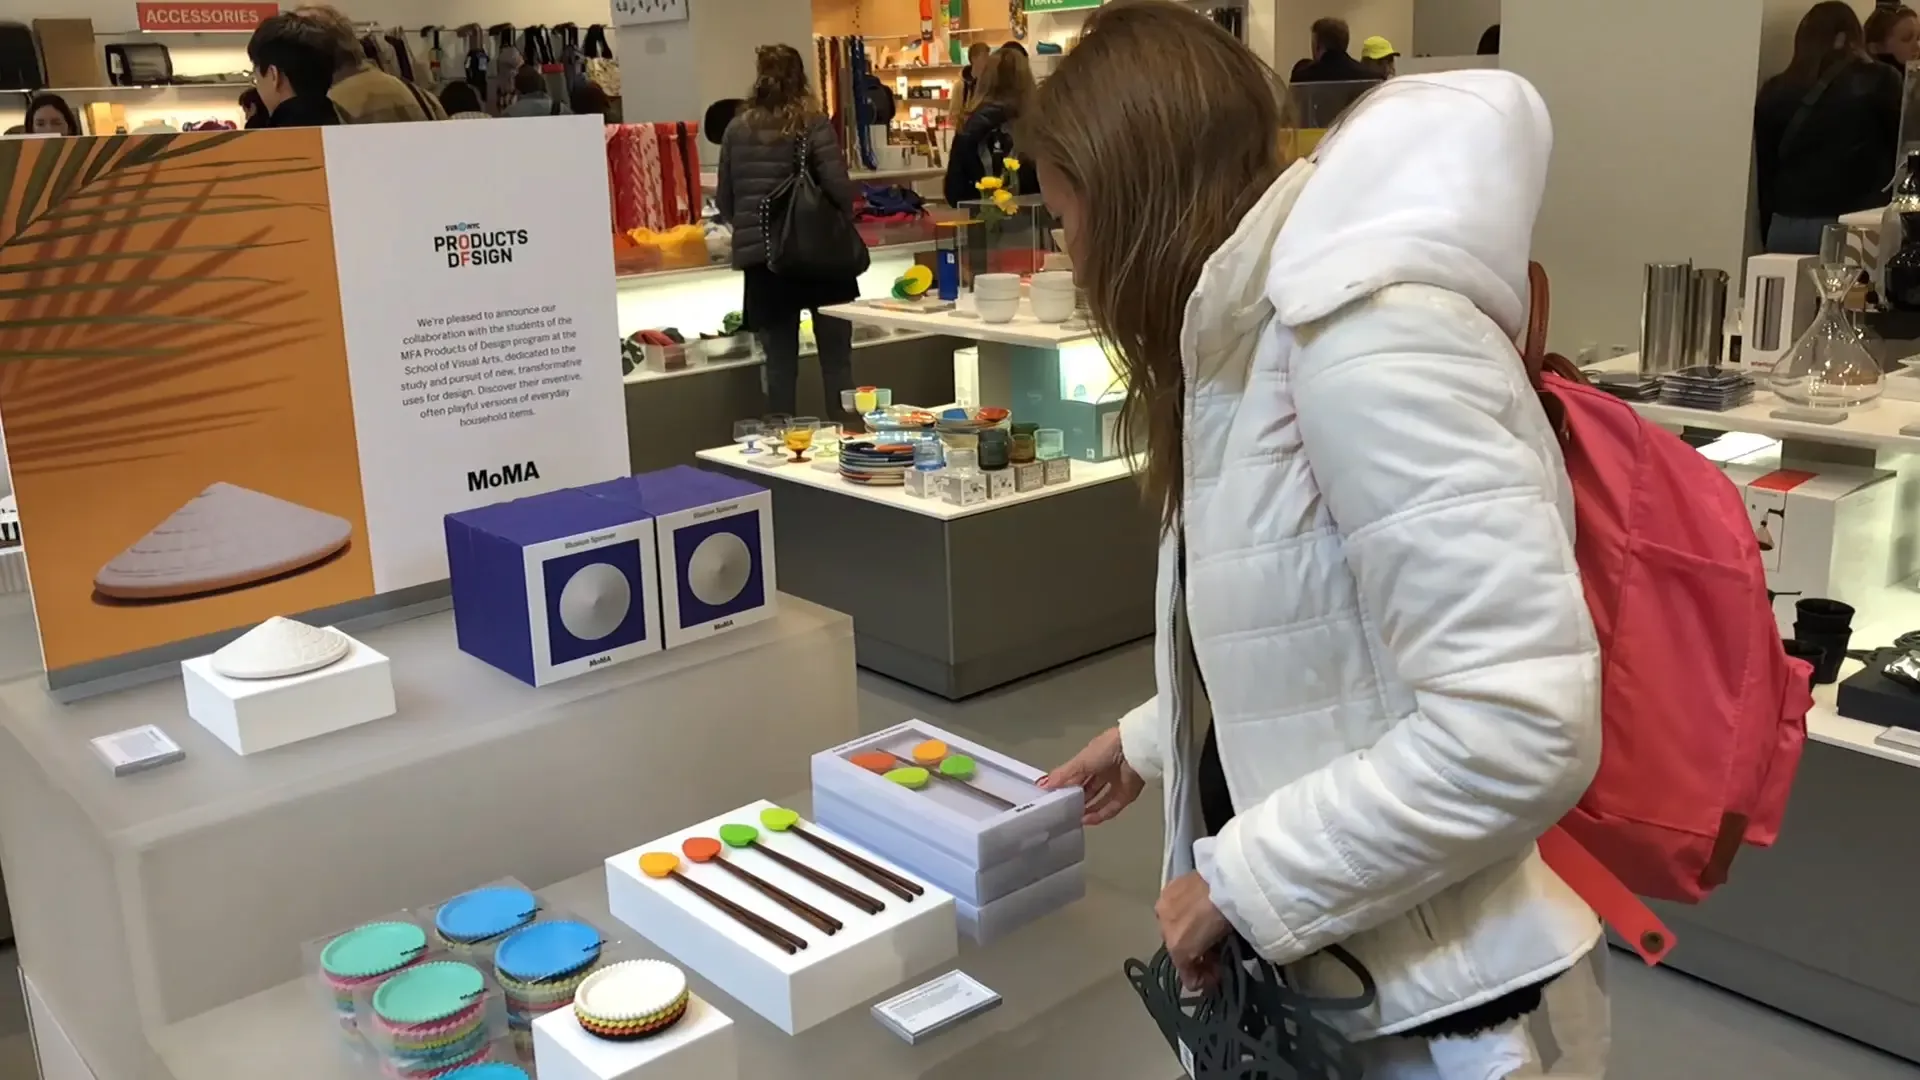 A customer picking up the Ambi Chopsticks and Holders at the MoMA Design Store in Midtown Manhattan.